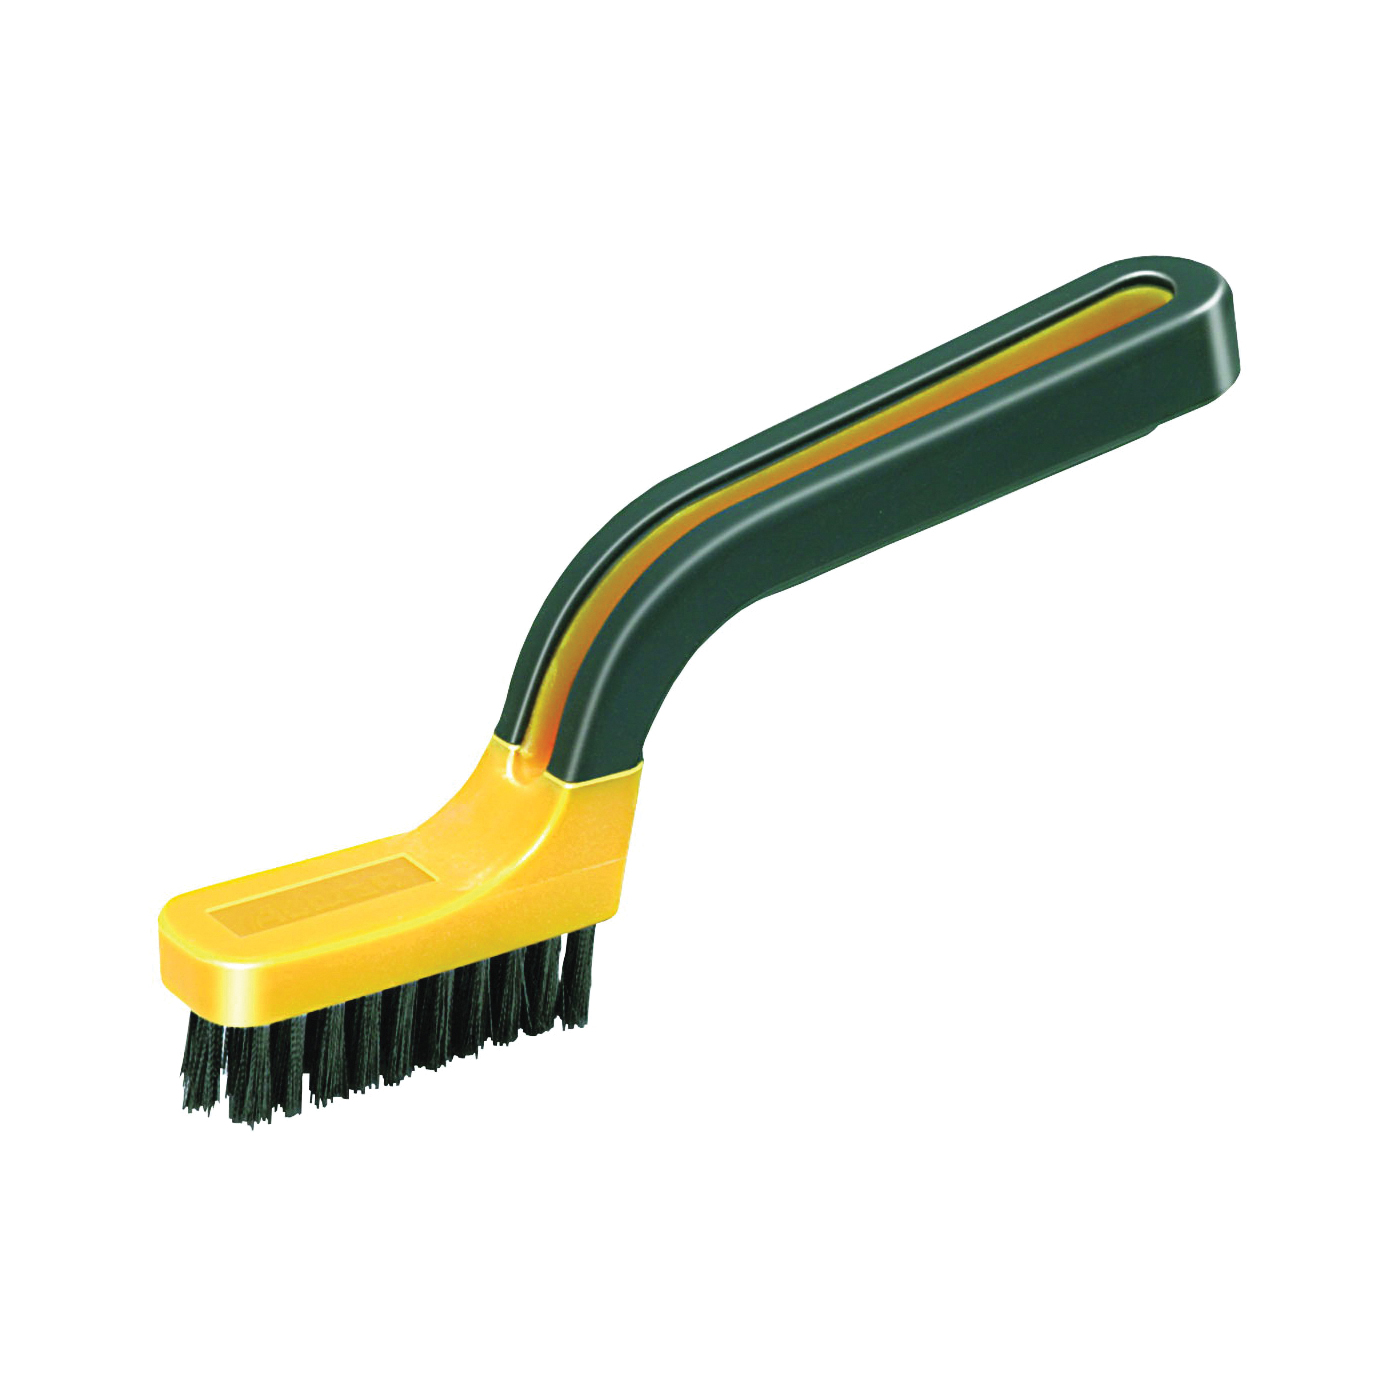 Allway Tools GB Grout Brush, 7 in L Blade, 3/4 in W Blade, Nylon Blade, Soft-Grip Handle - 1